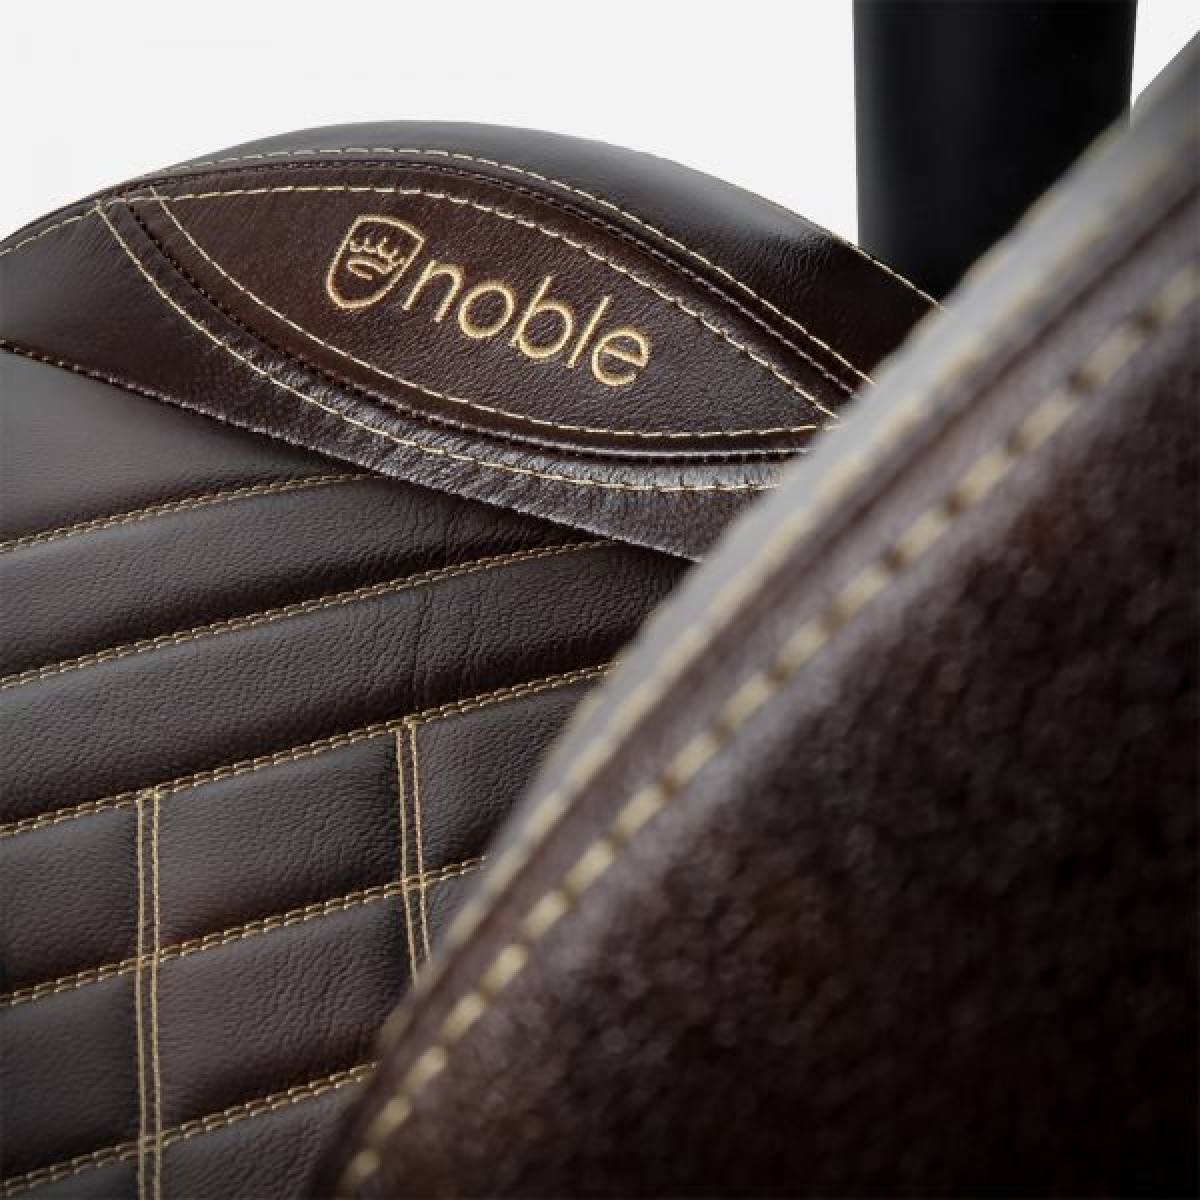 Ghế Noblechairs Epic Series Brown/Begie (Real Leather)